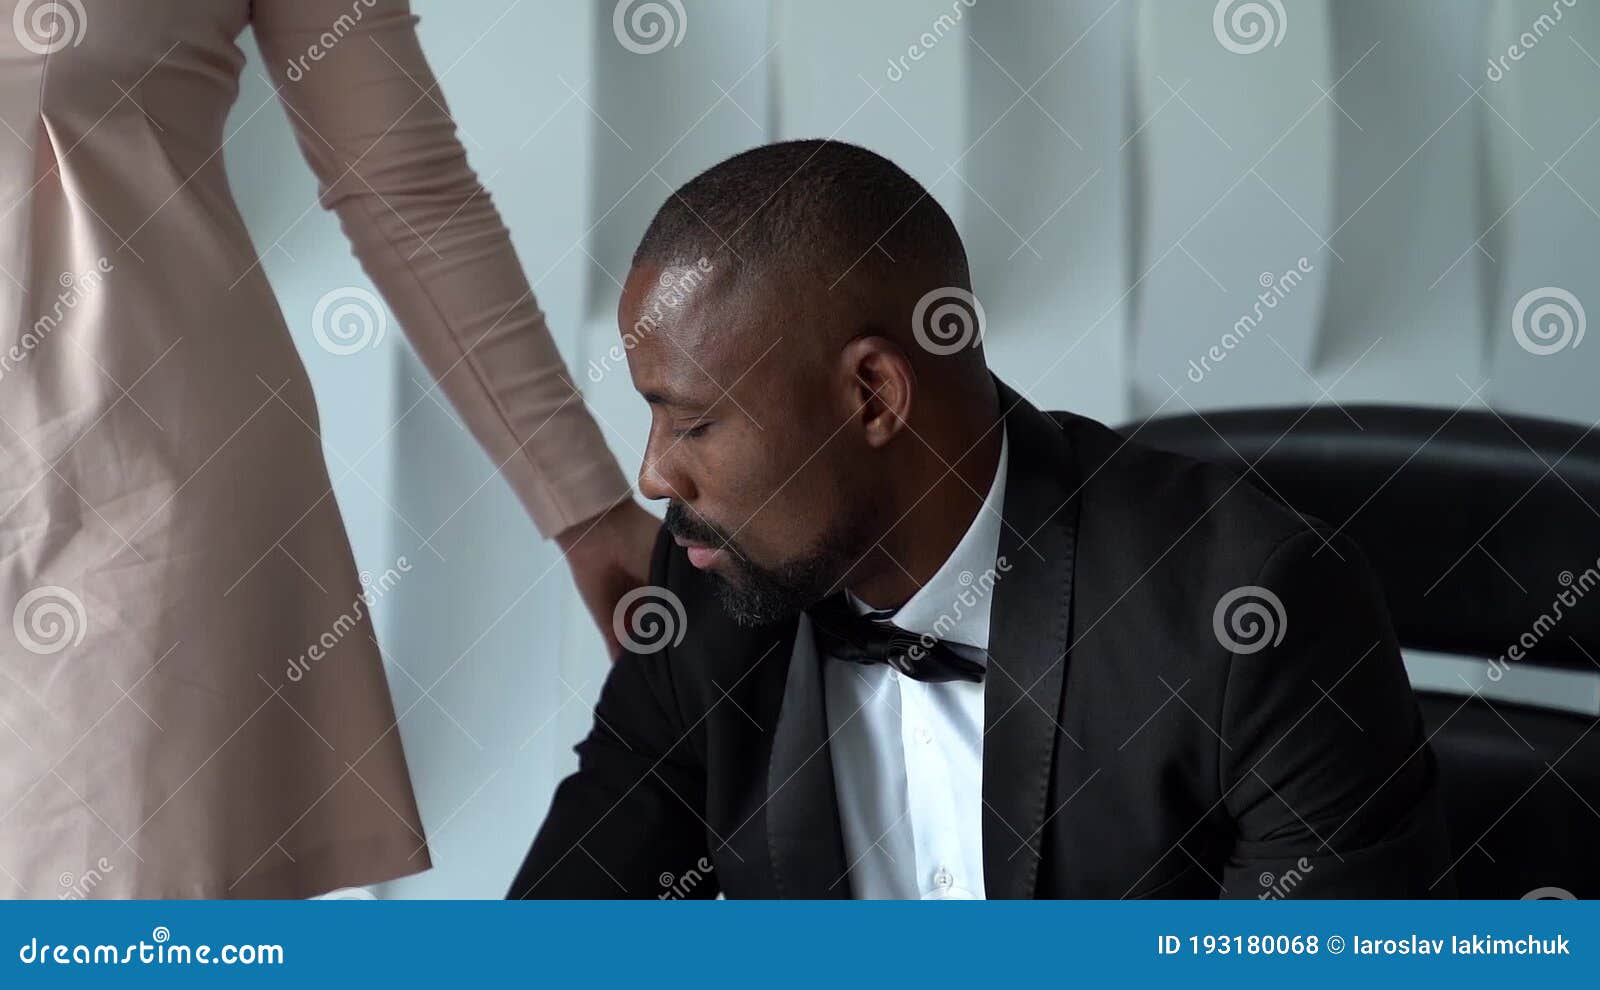 Black Man White Woman Stock Footage and Videos image